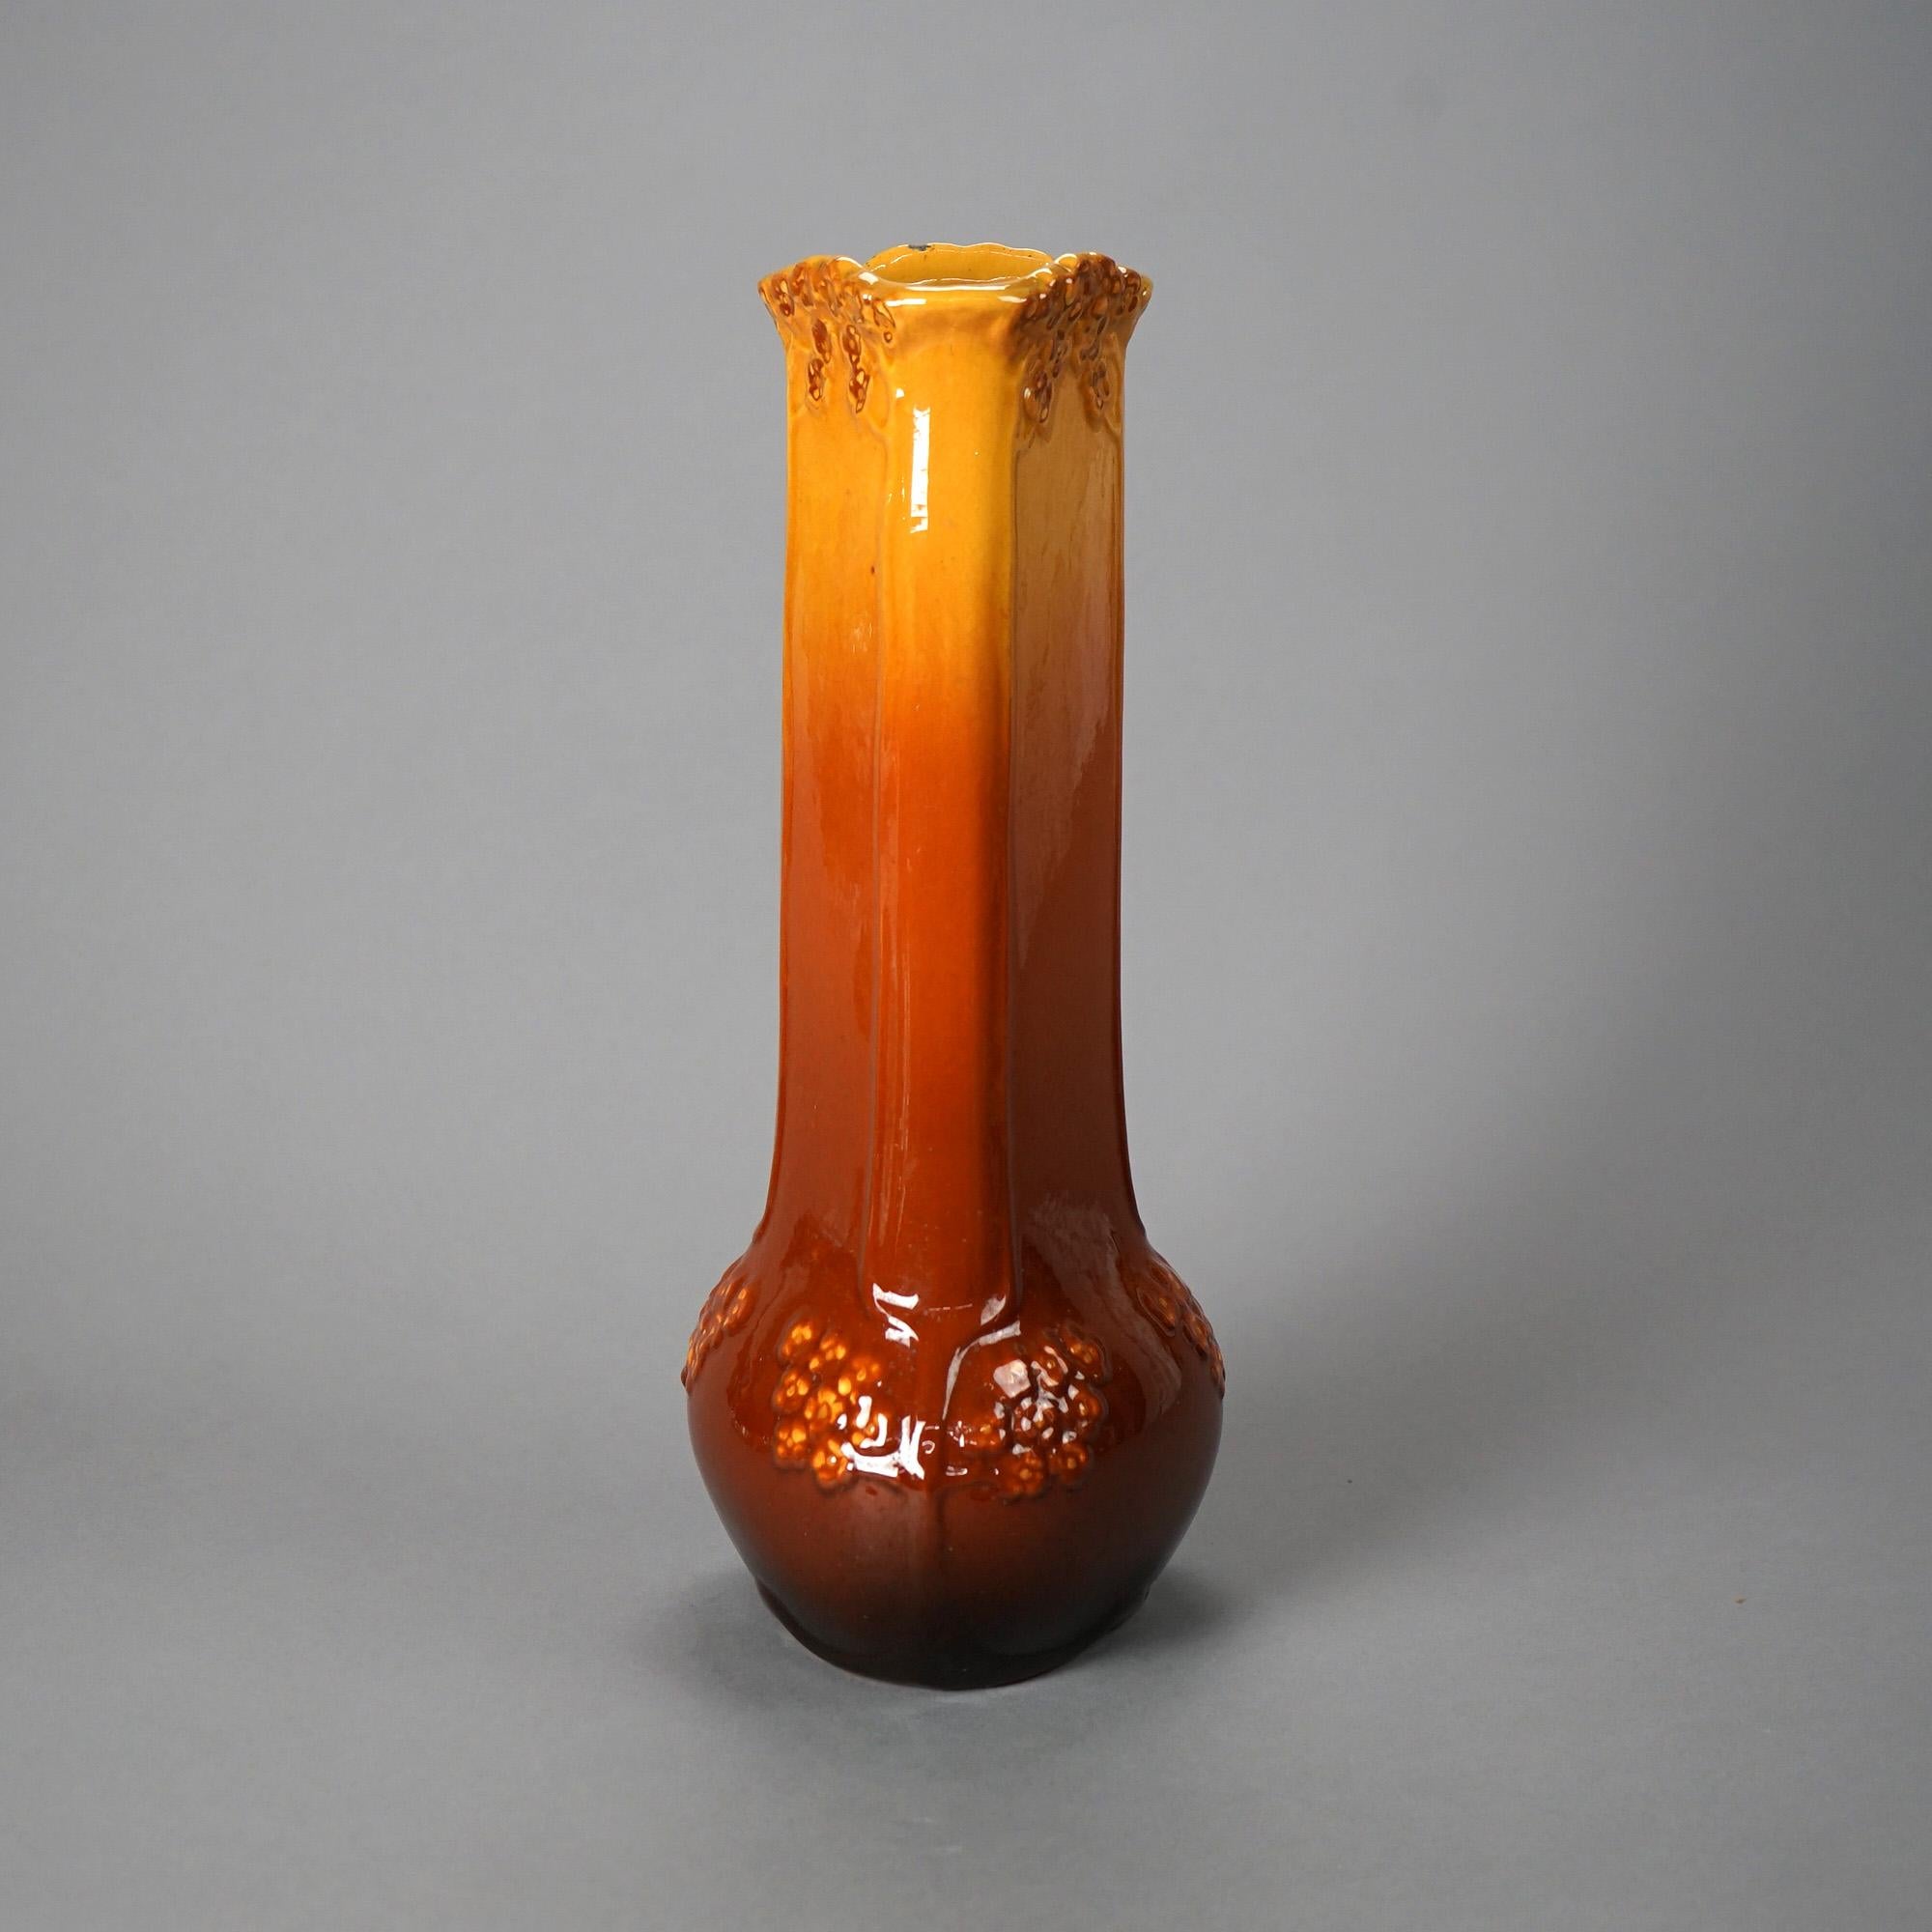 A large antique Art Nouveau vase by Weller offers art pottery construction in stylized triangulated bottle form and having foliate elements in relief, maker marked on base as photographed, c1920

Measures - 15.5